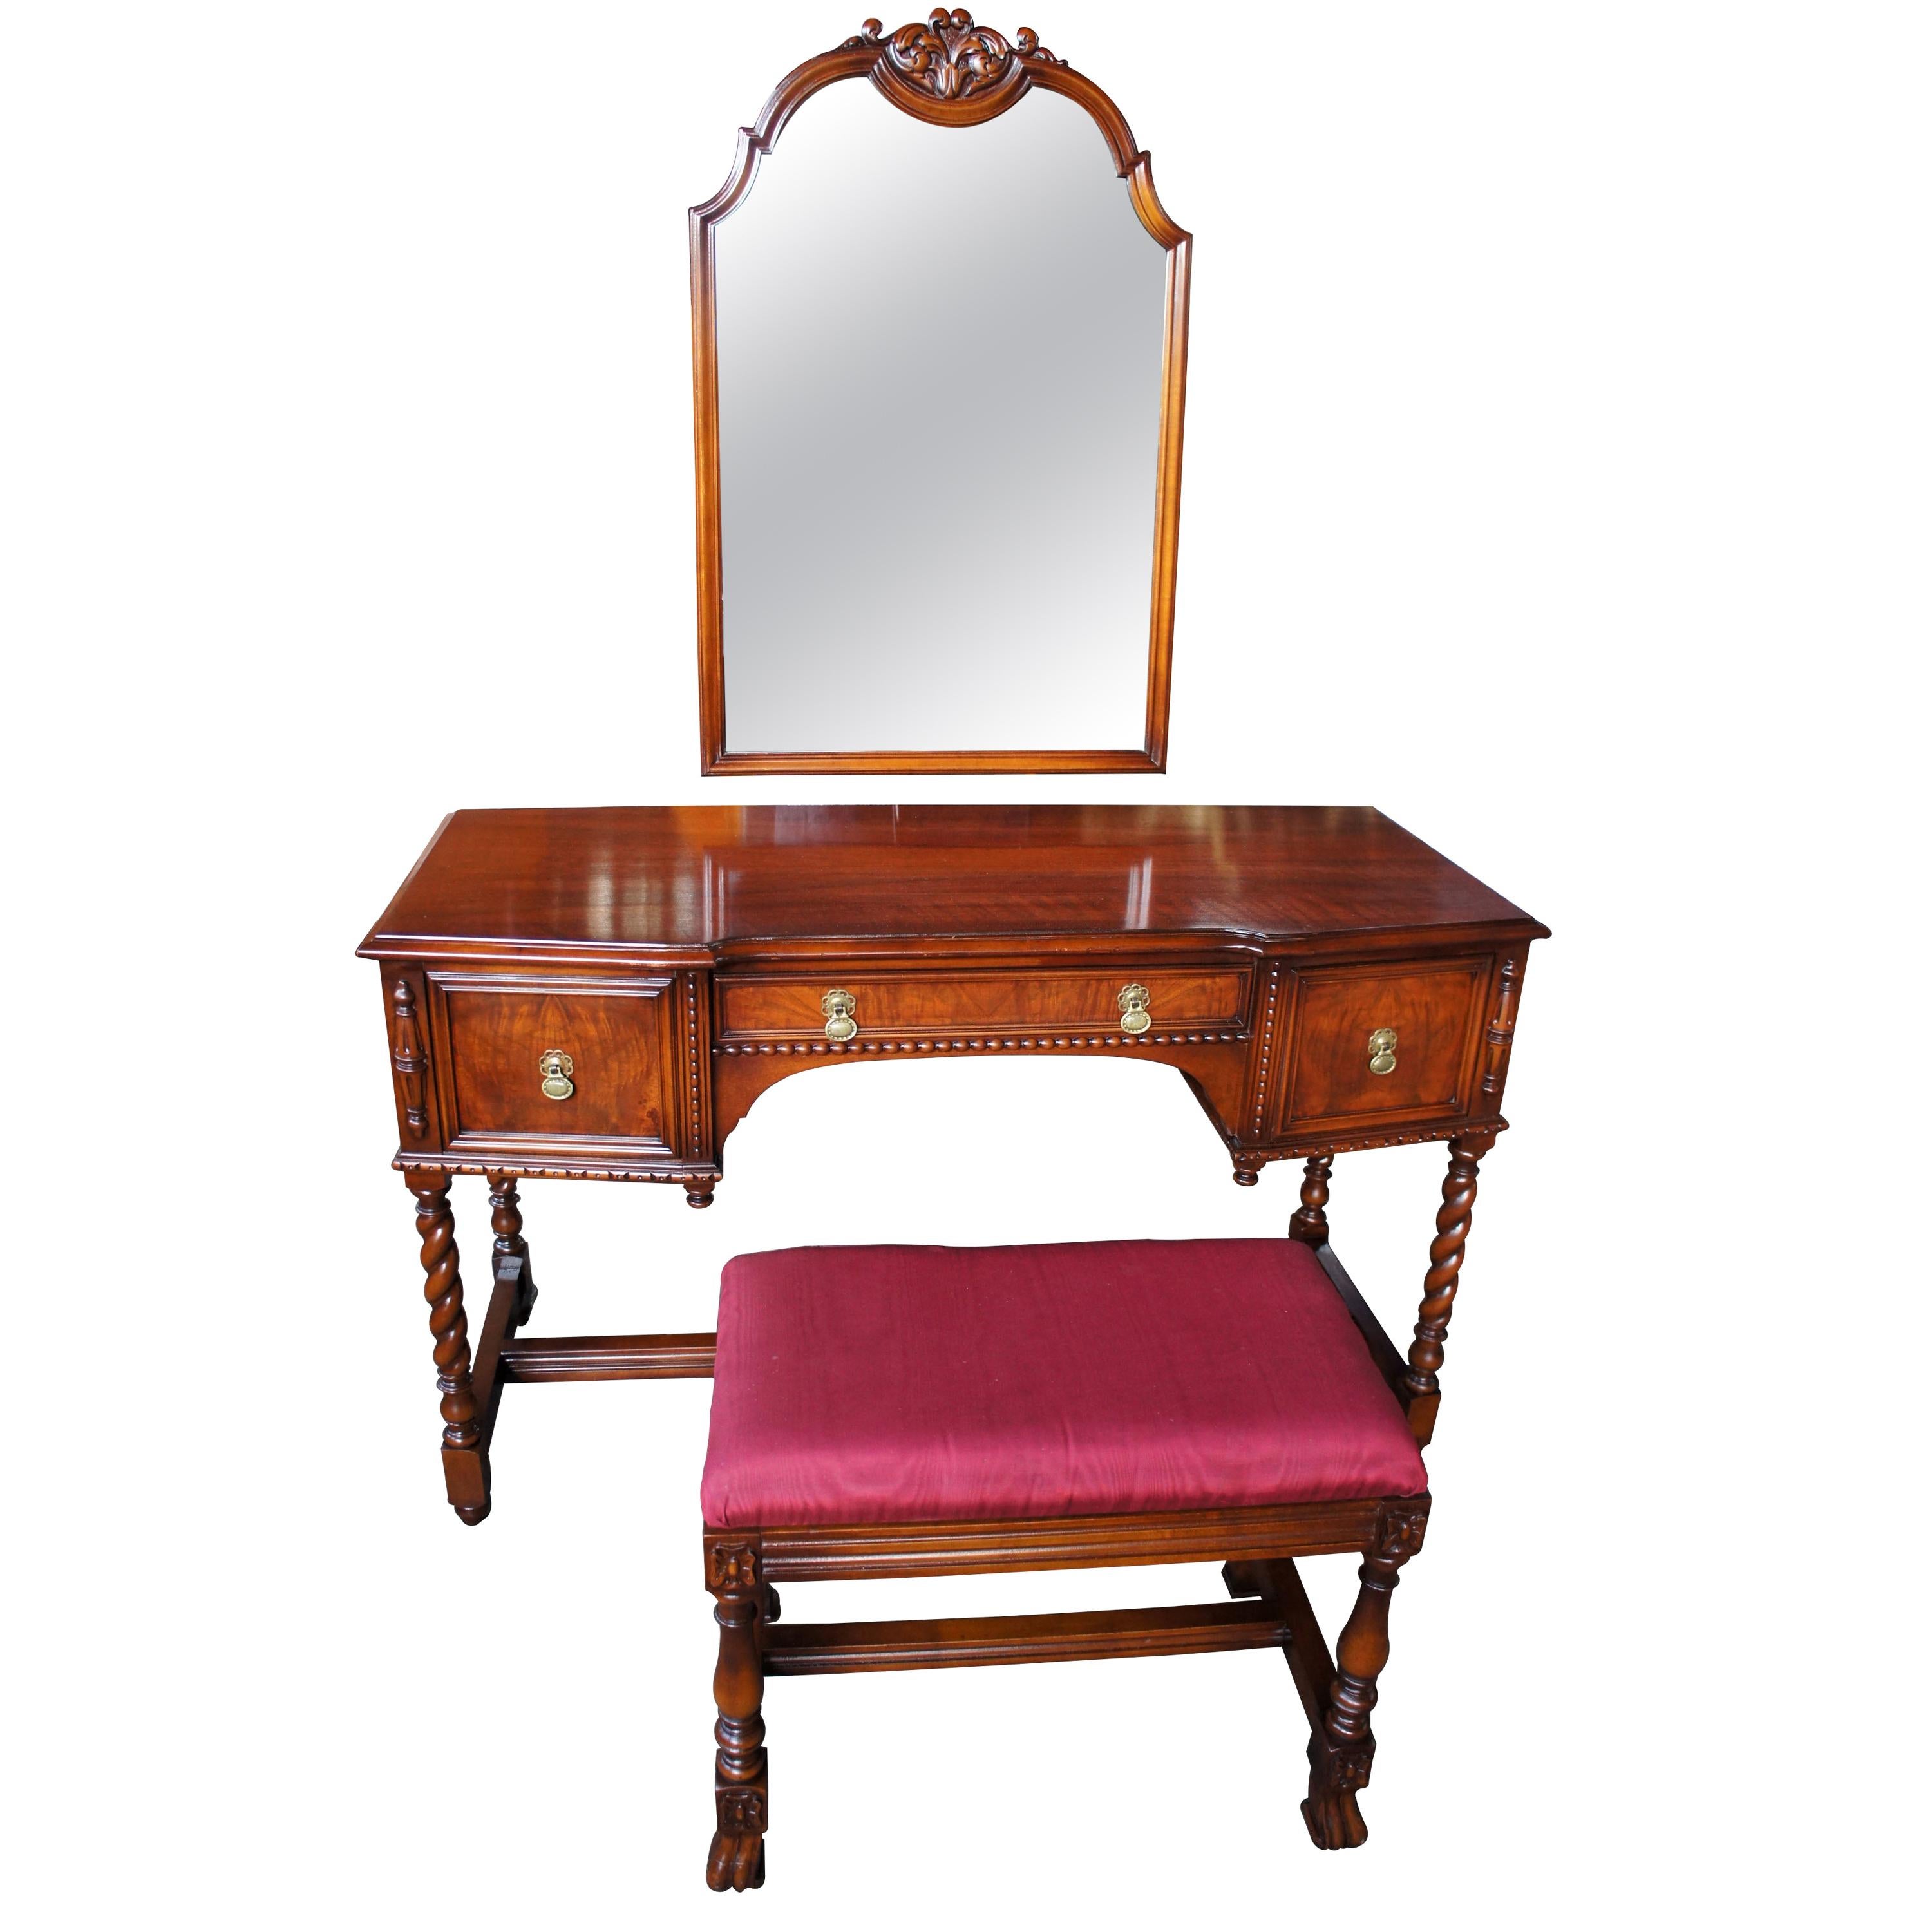 Robert Irwin Antique Jacobean Revival Walnut Dressing Table & Mirror with Bench